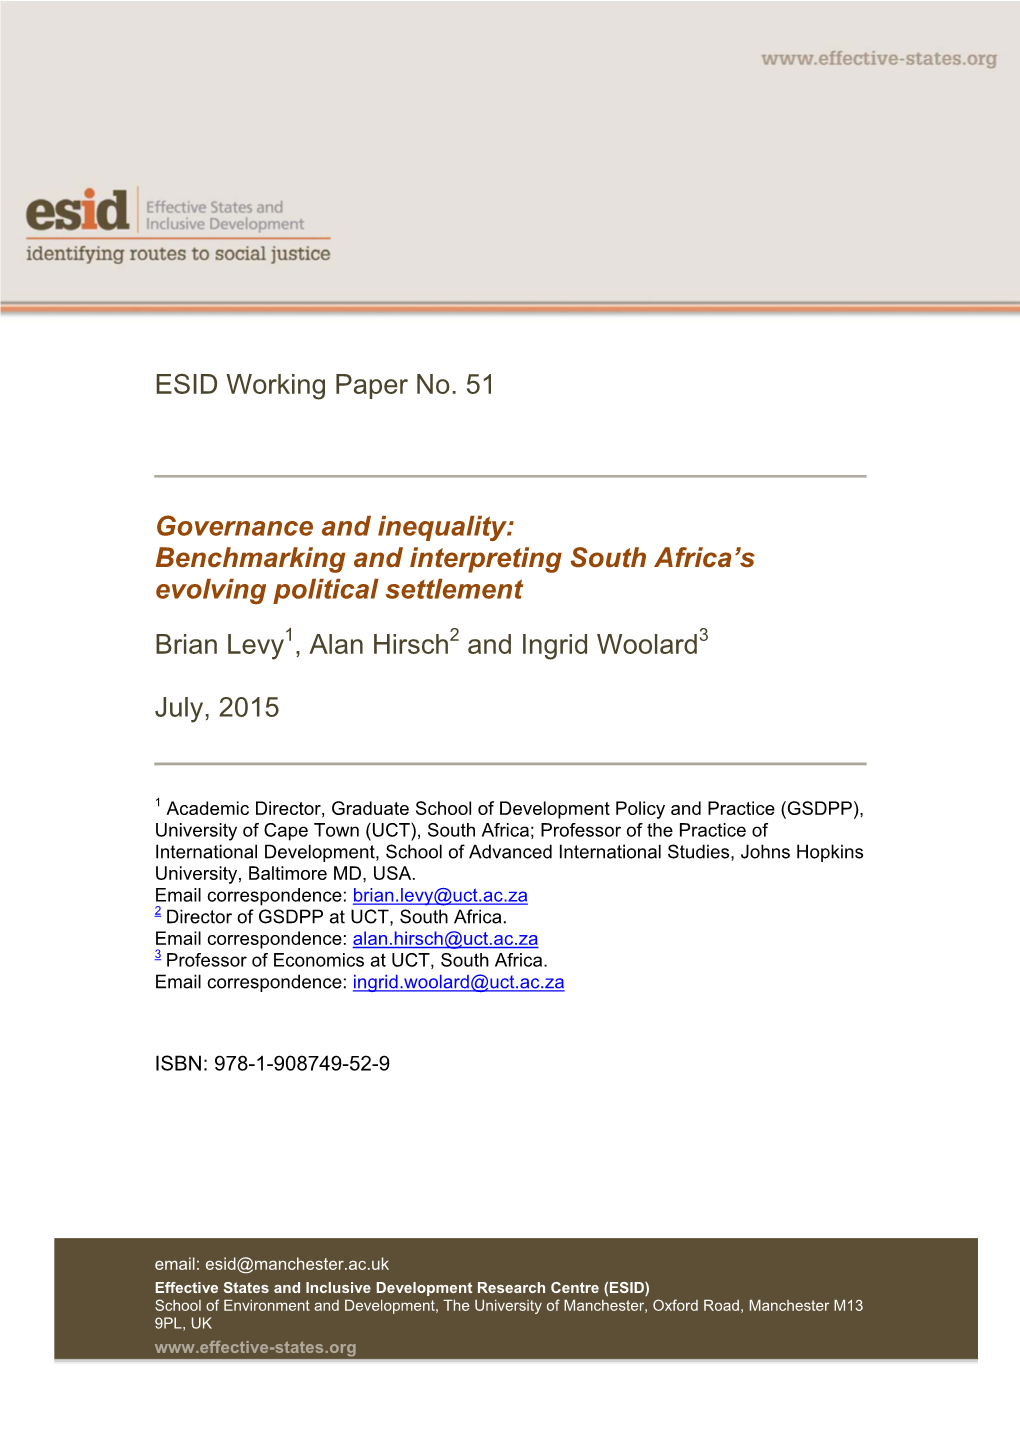 Benchmarking and Interpreting South Africa's Evolving Political Settleme